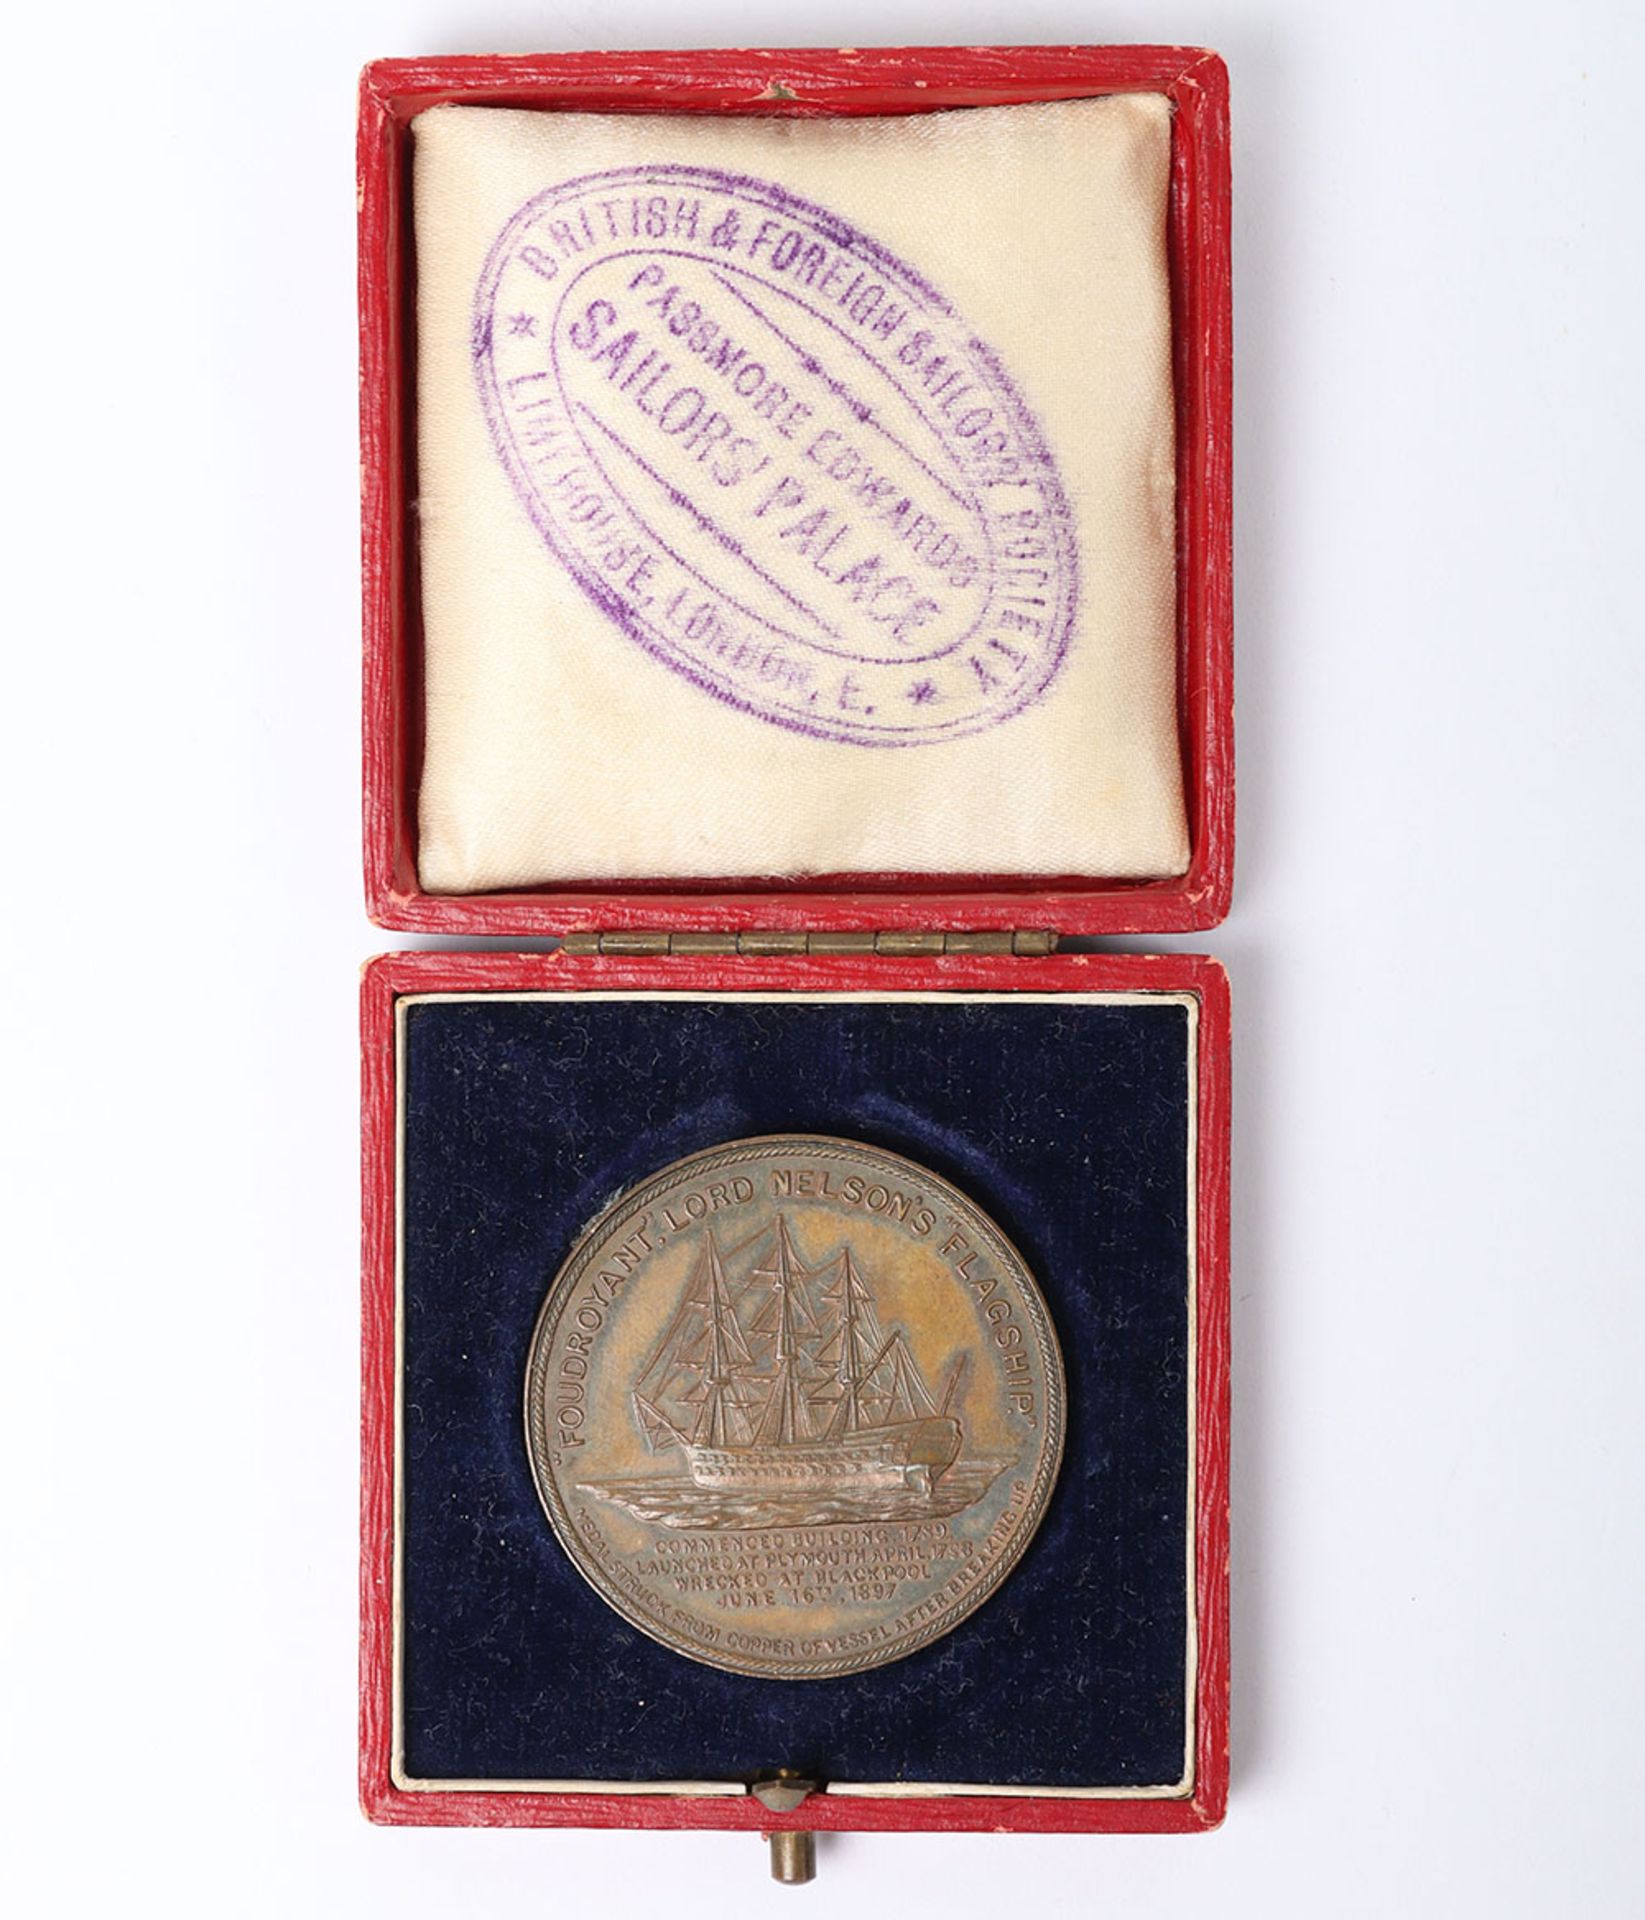 Lord Nelson – Foudroyant Lord Nelson Flagship Commemorative Medallion